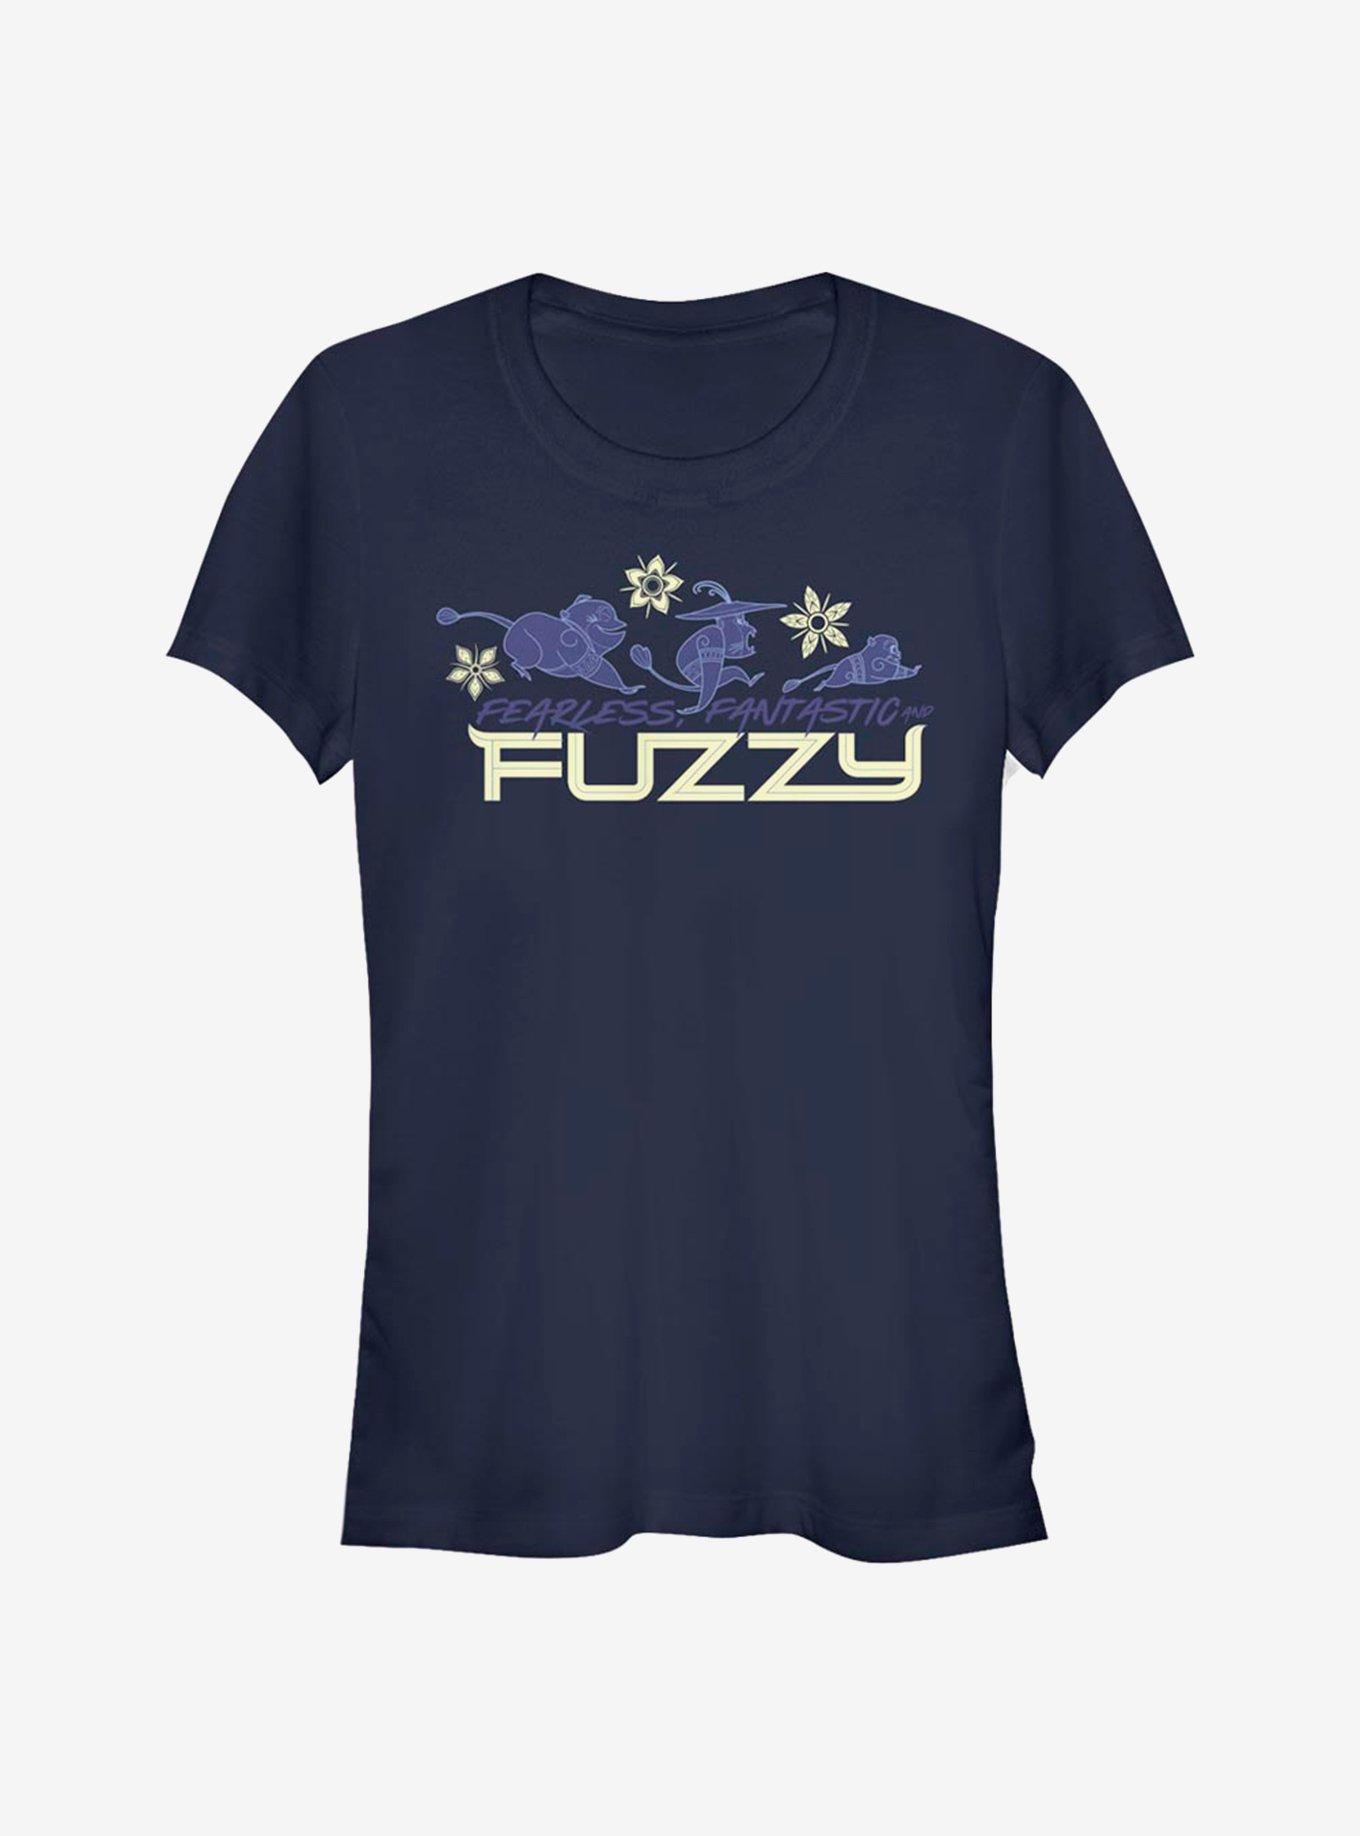 Disney Raya and the Last Dragon Fearless And Fuzzy Girls T-Shirt, NAVY, hi-res